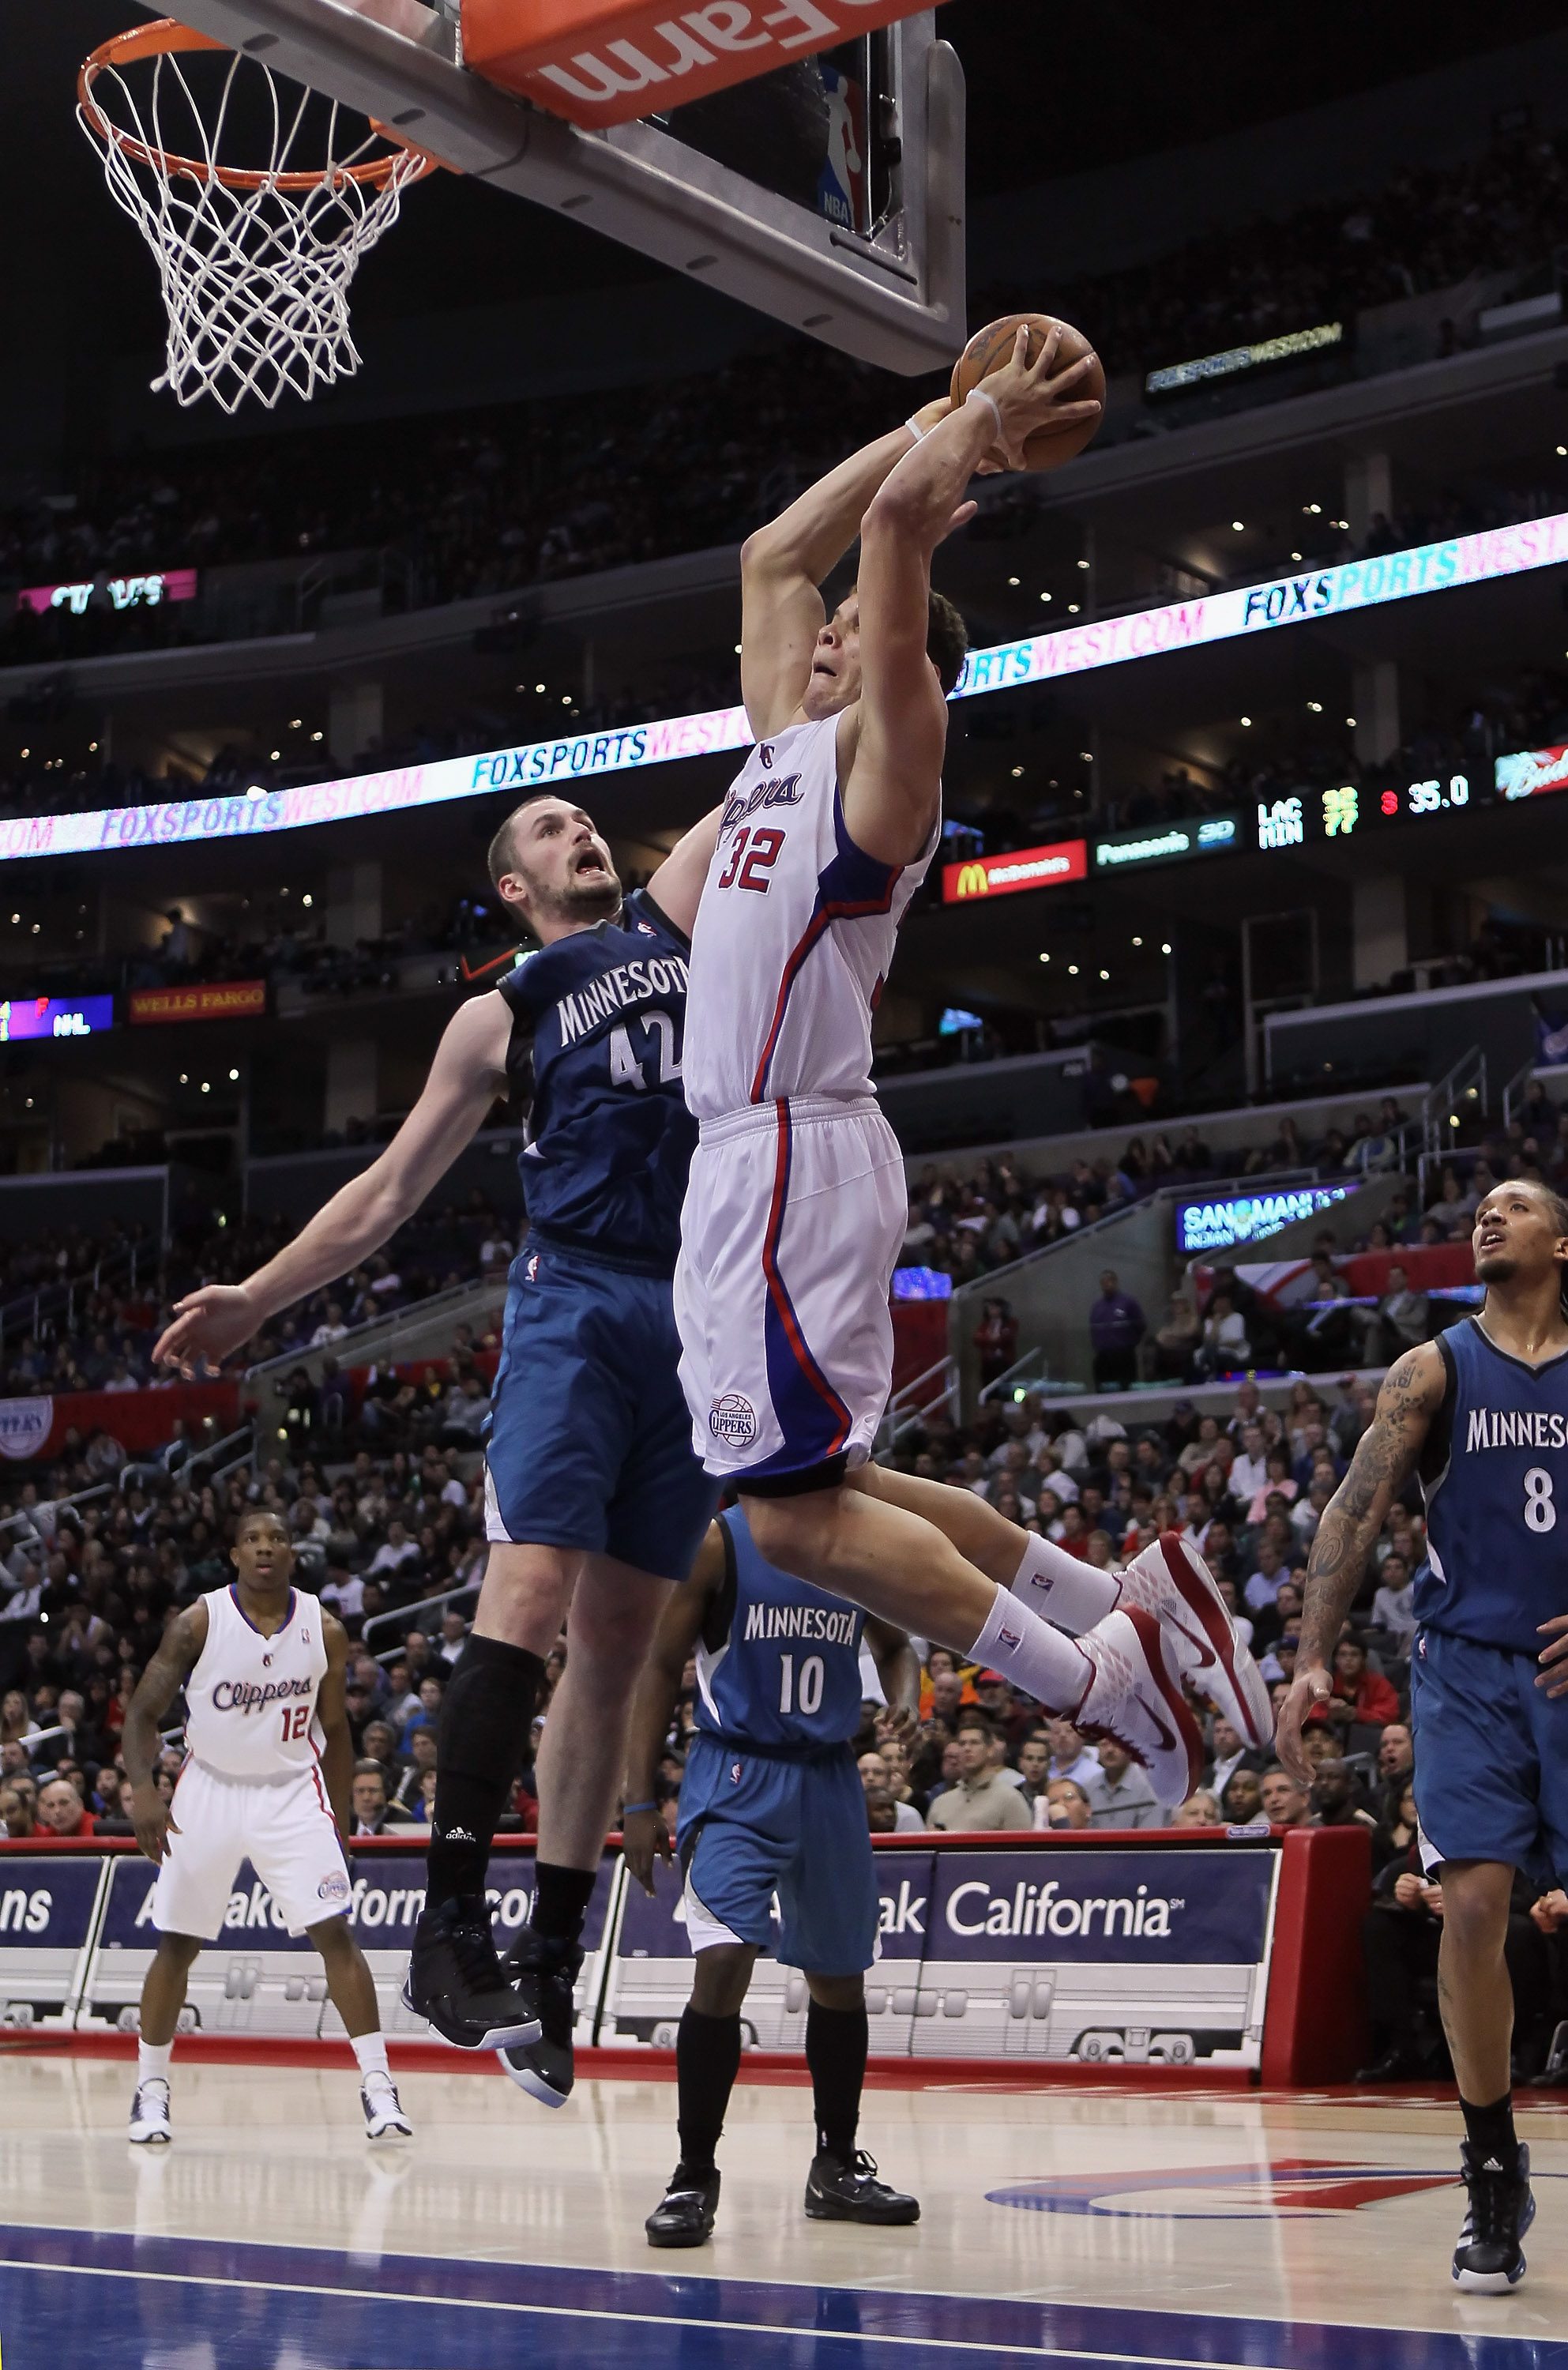 LOS ANGELES, CA - DECEMBER 20:  Blake Griffin #32 of the Los Angeles Clippers drives past Kevin Love #42 of the Minnesota Timberwolves for a dunk during the second half at Staples Center on December 20, 2010 in Los Angeles, California. The Clippers defeat